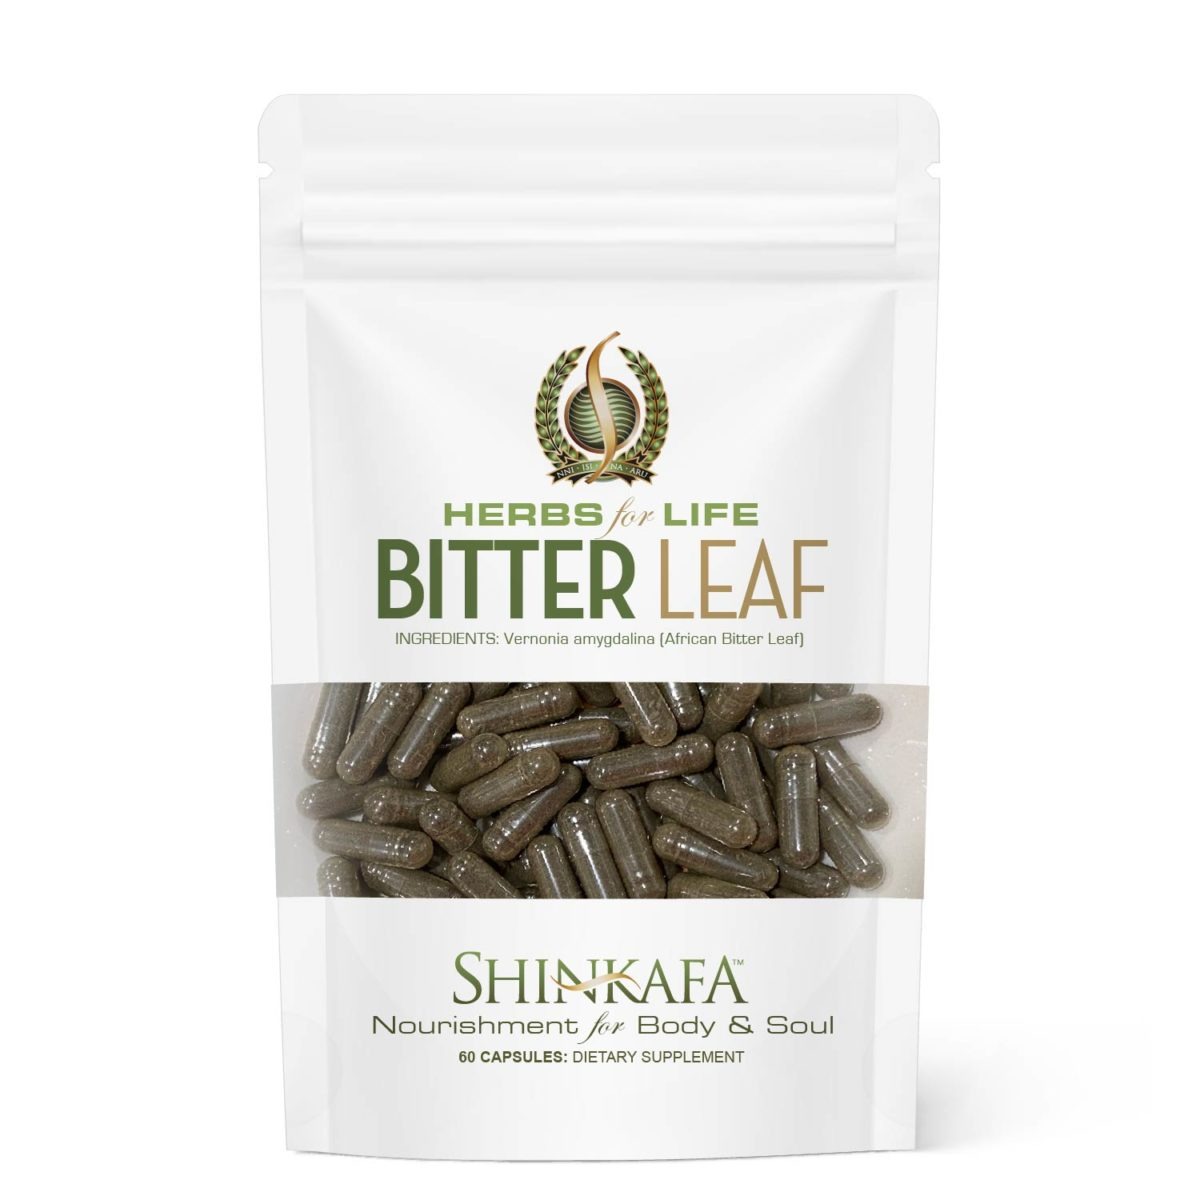 Bitter Leaf: Herbs for Life by Shinkafa - Front